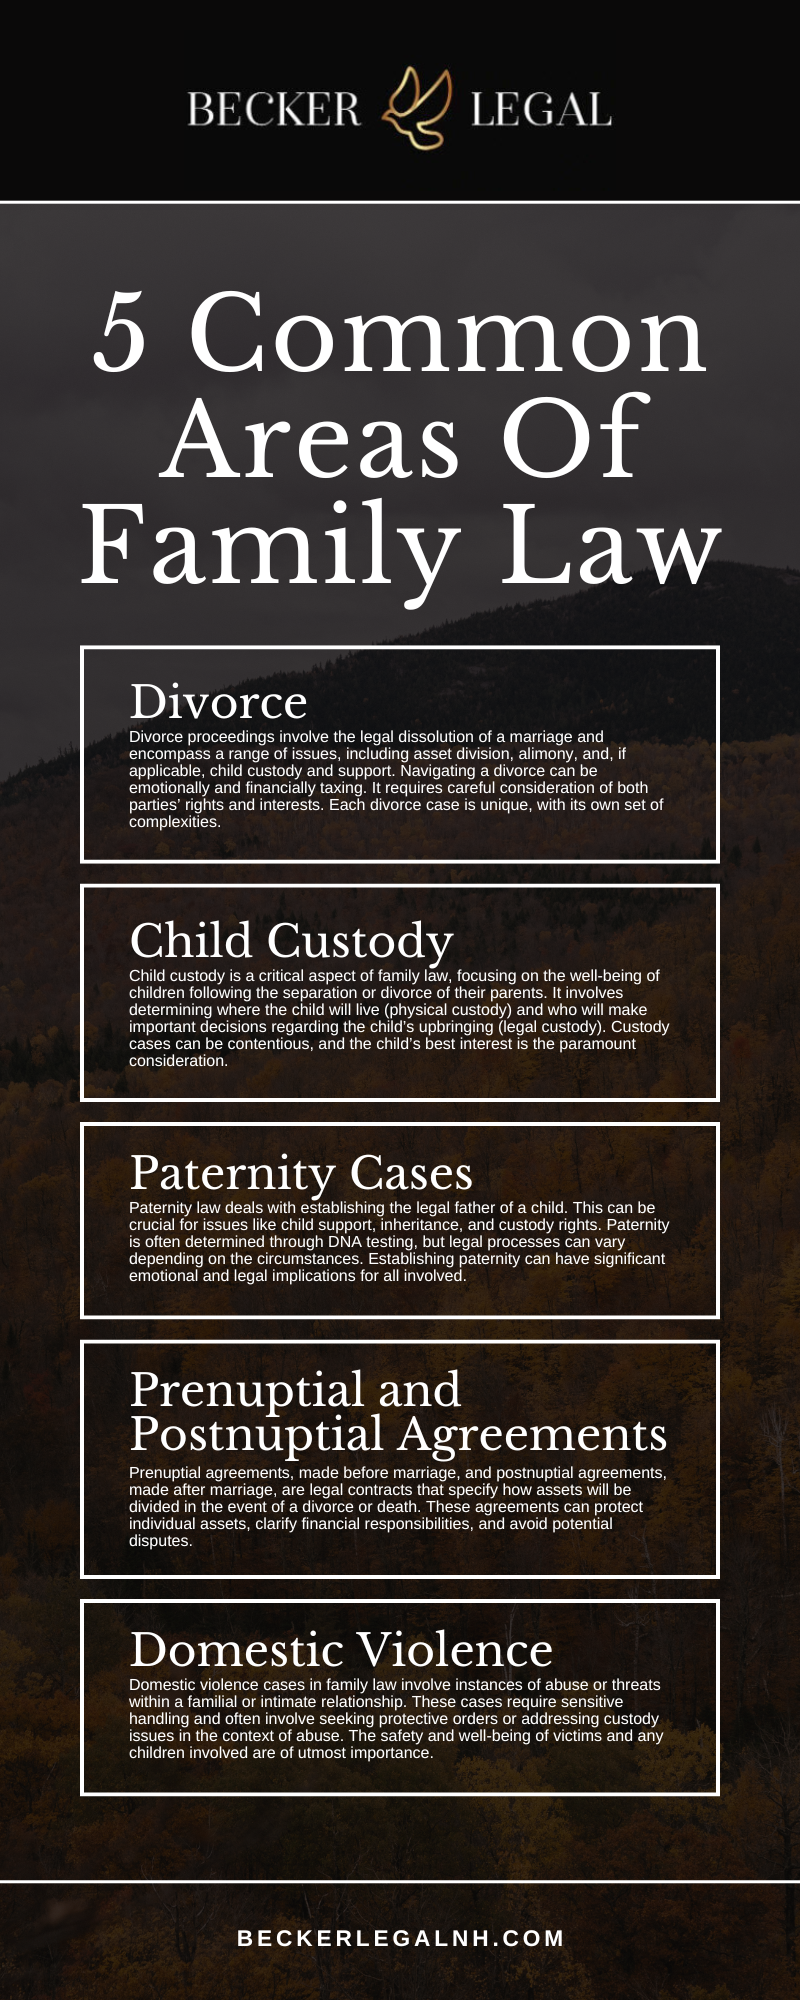 5 Common Areas Of Family Law Infographic